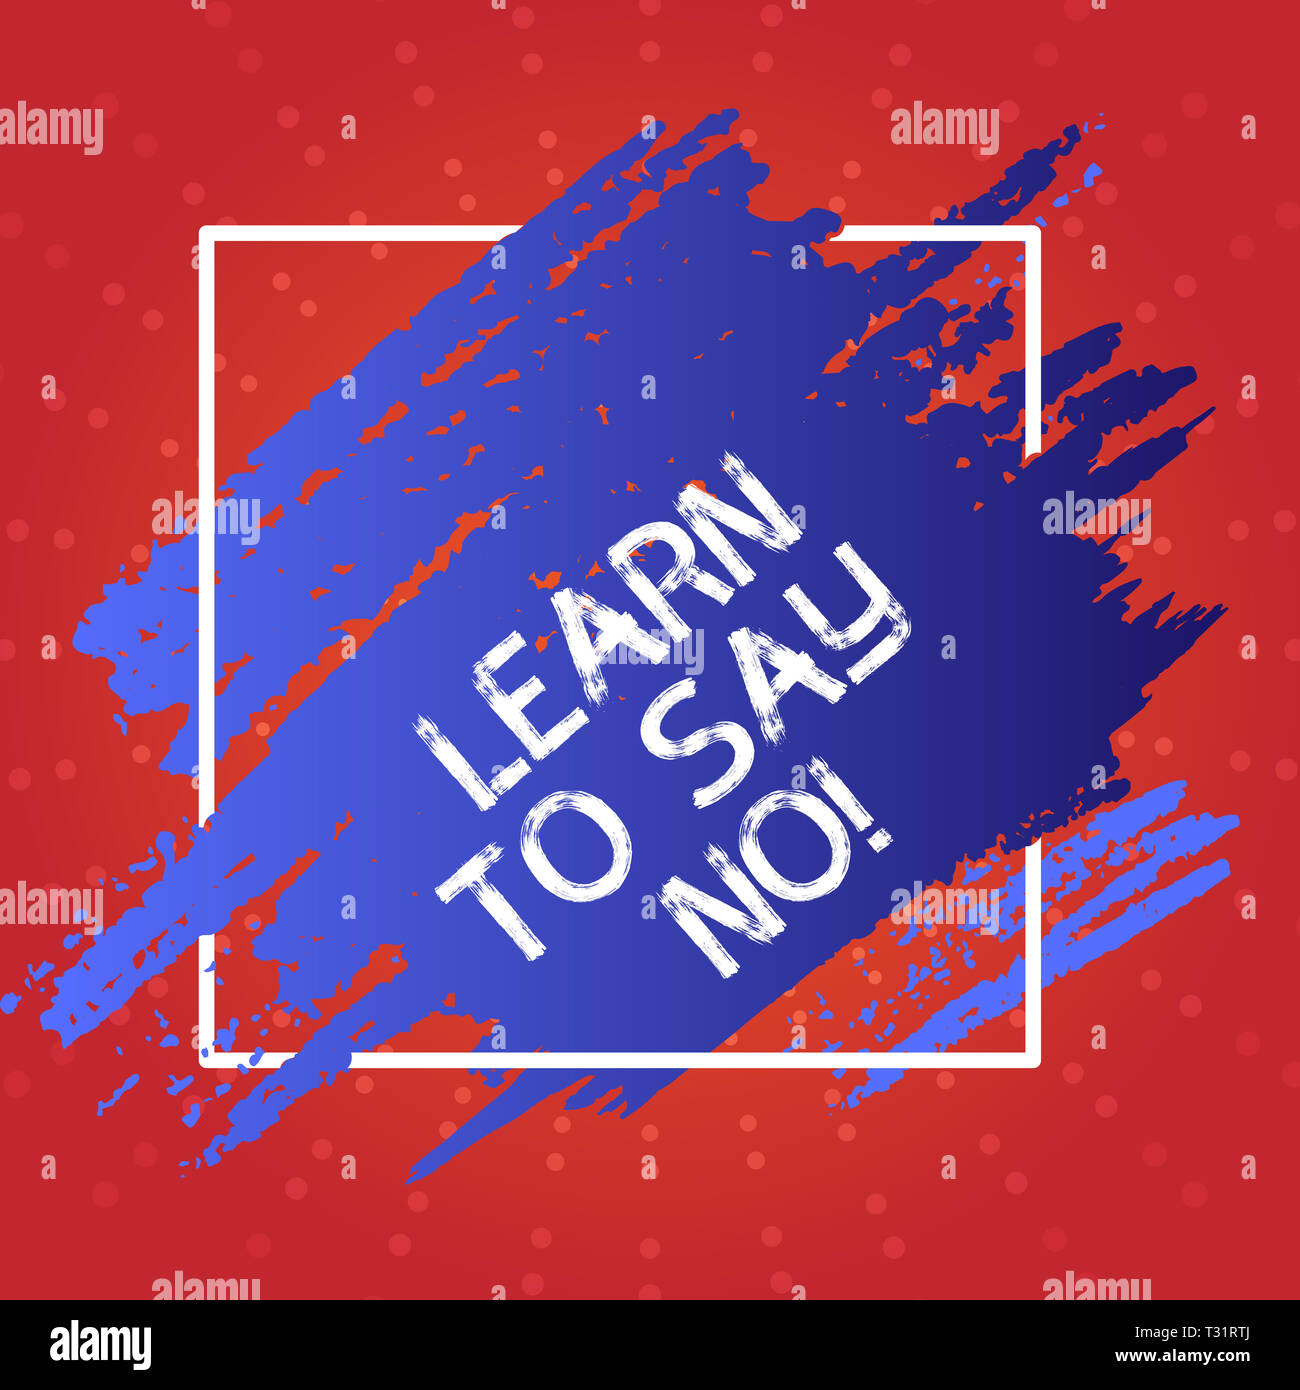 Conceptual Hand Writing Showing Learn To Say No Concept Meaning It Means That You Need To Decline Or Refuse Few Things Blue Tone Paint Inside Square Stock Photo Alamy